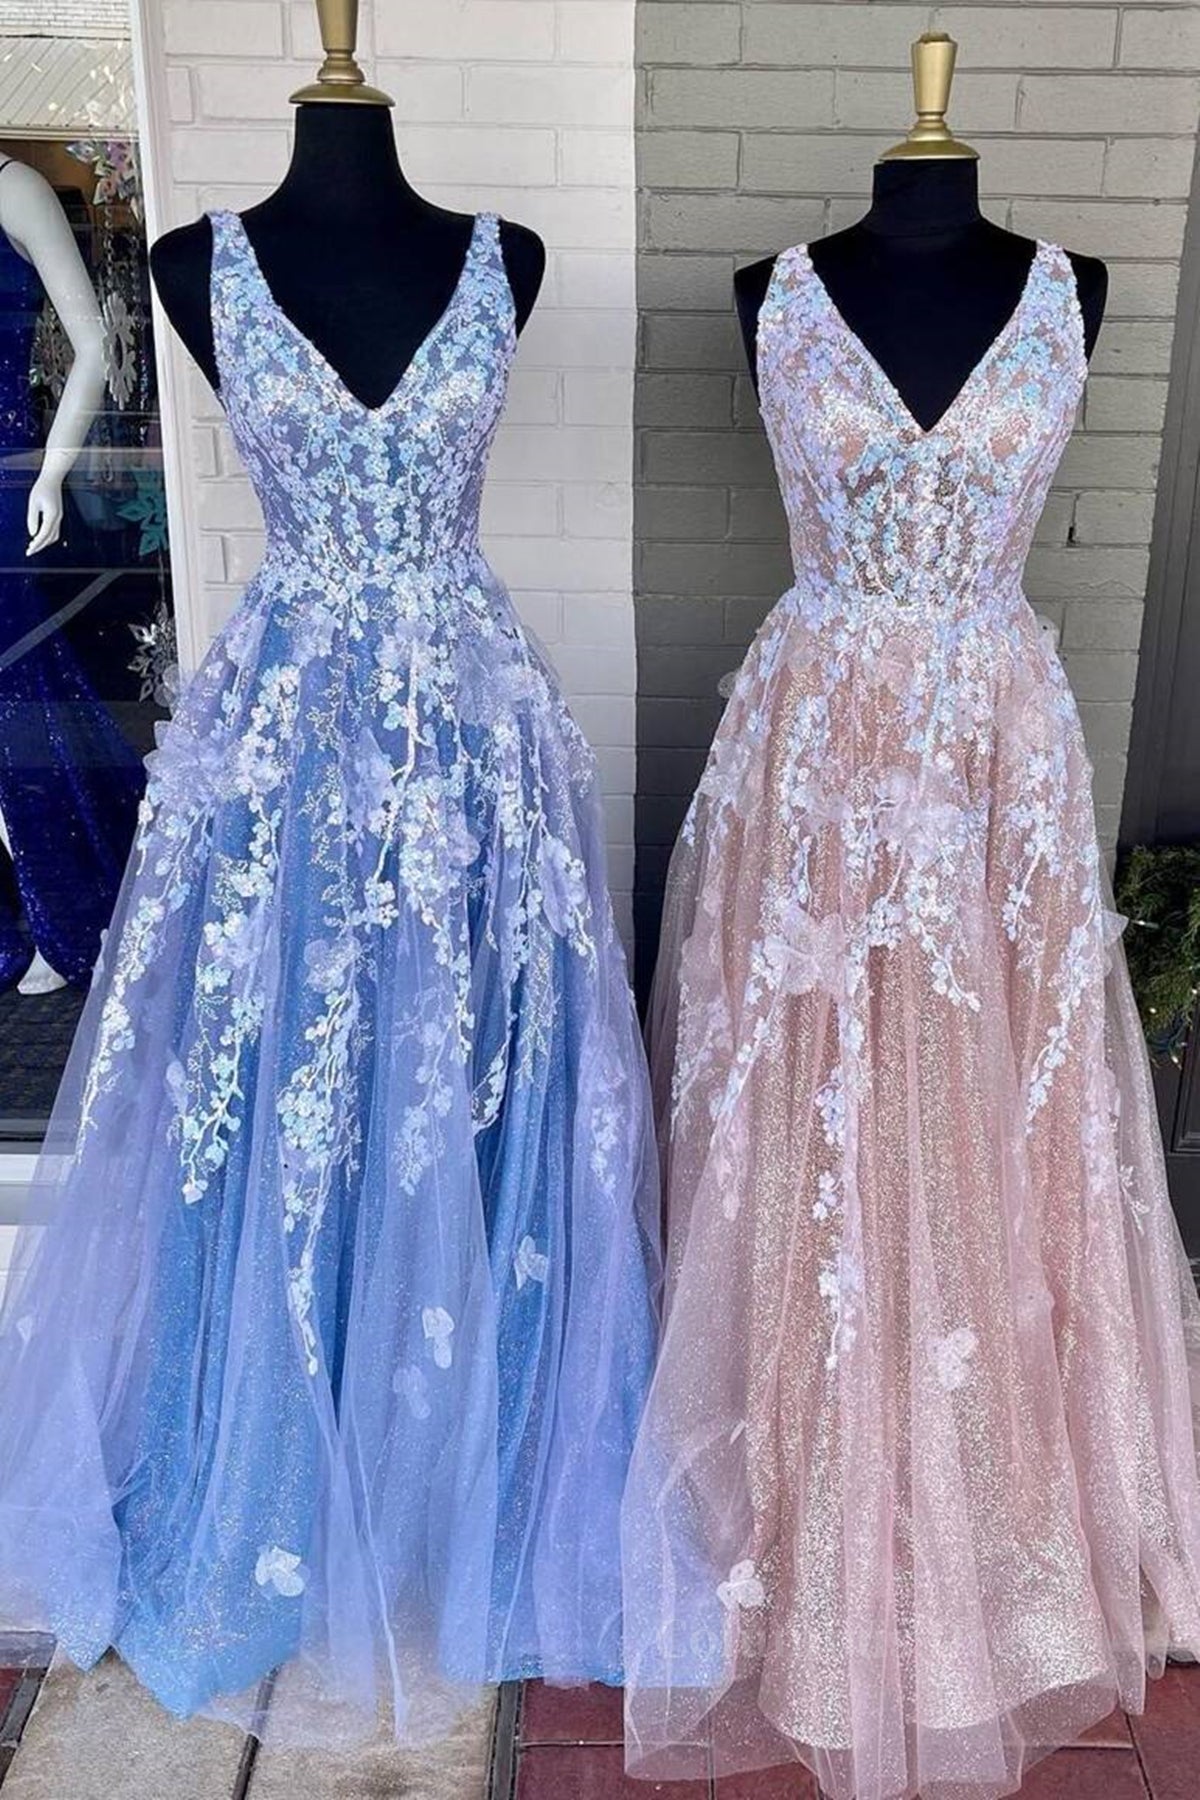 A Line V Neck Blue/Champagne Lace Floral Long Corset Prom Dresses, Blue/Champagne Lace Corset Formal Evening Dresses outfit, Formal Dress Prom